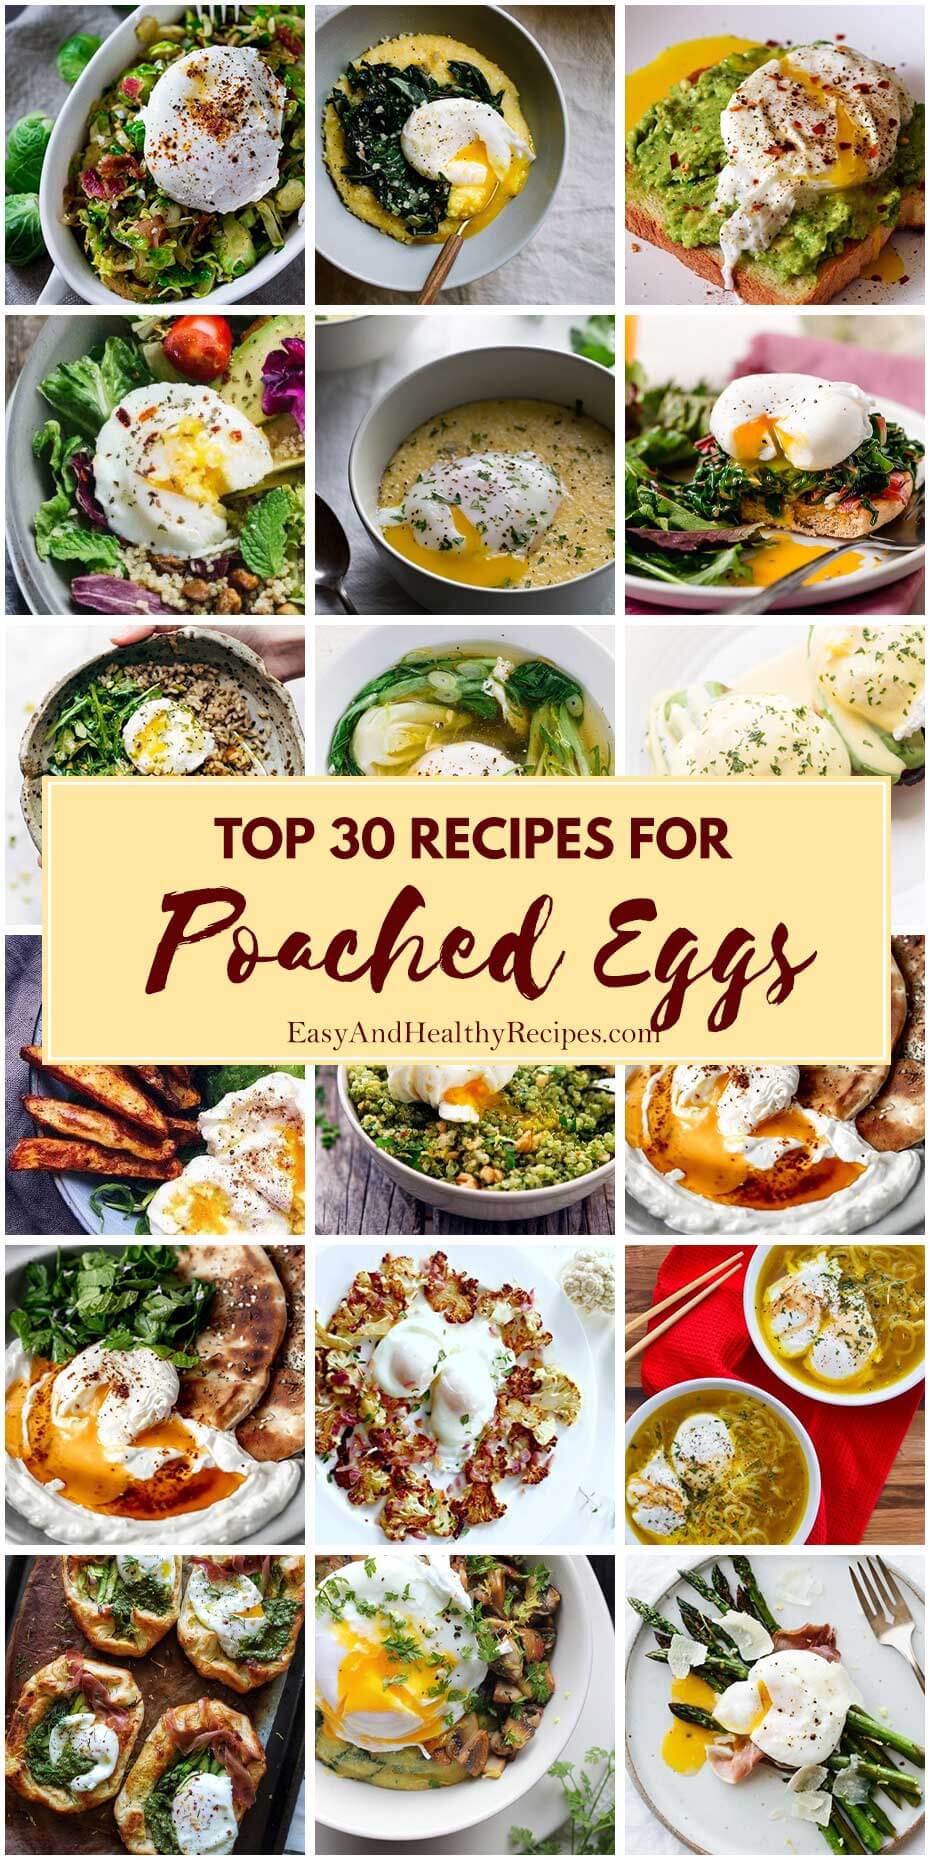 30 Delicious Dishes Made with Poached Eggs, Poached Eggs